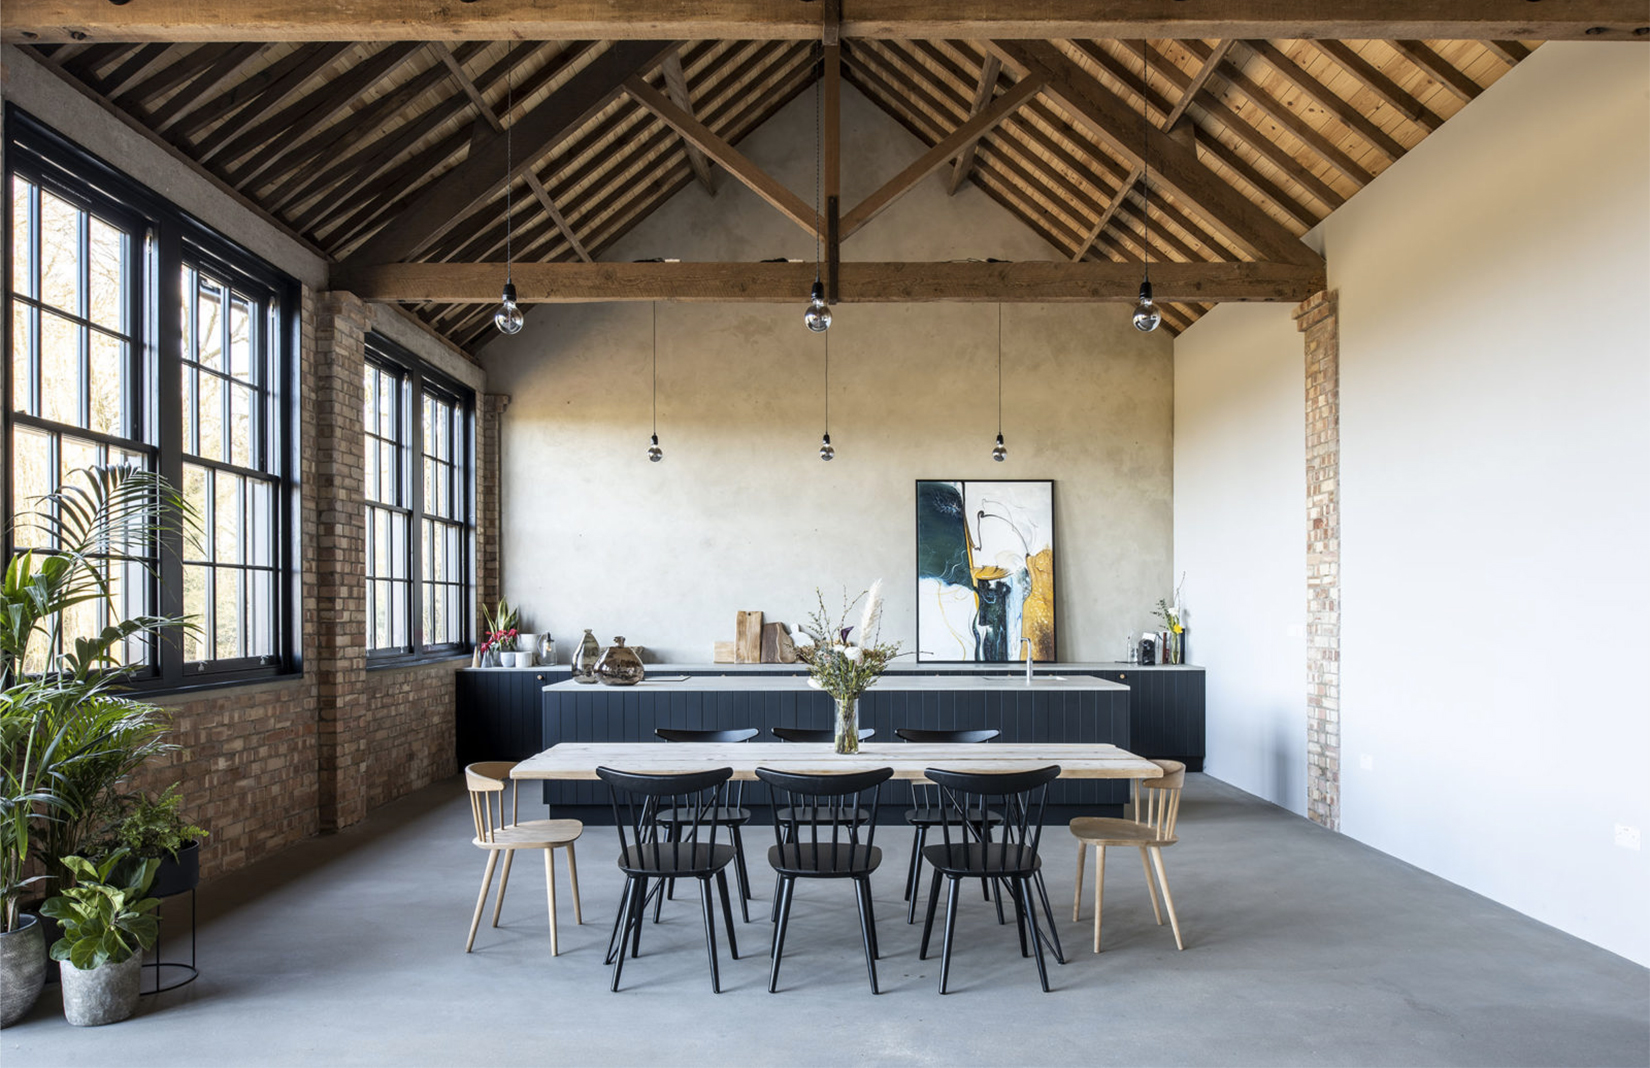 Masterfully converted in the Suffolk Countryside is this former diary barn which features trussed ceilings, bricks and concrete floors